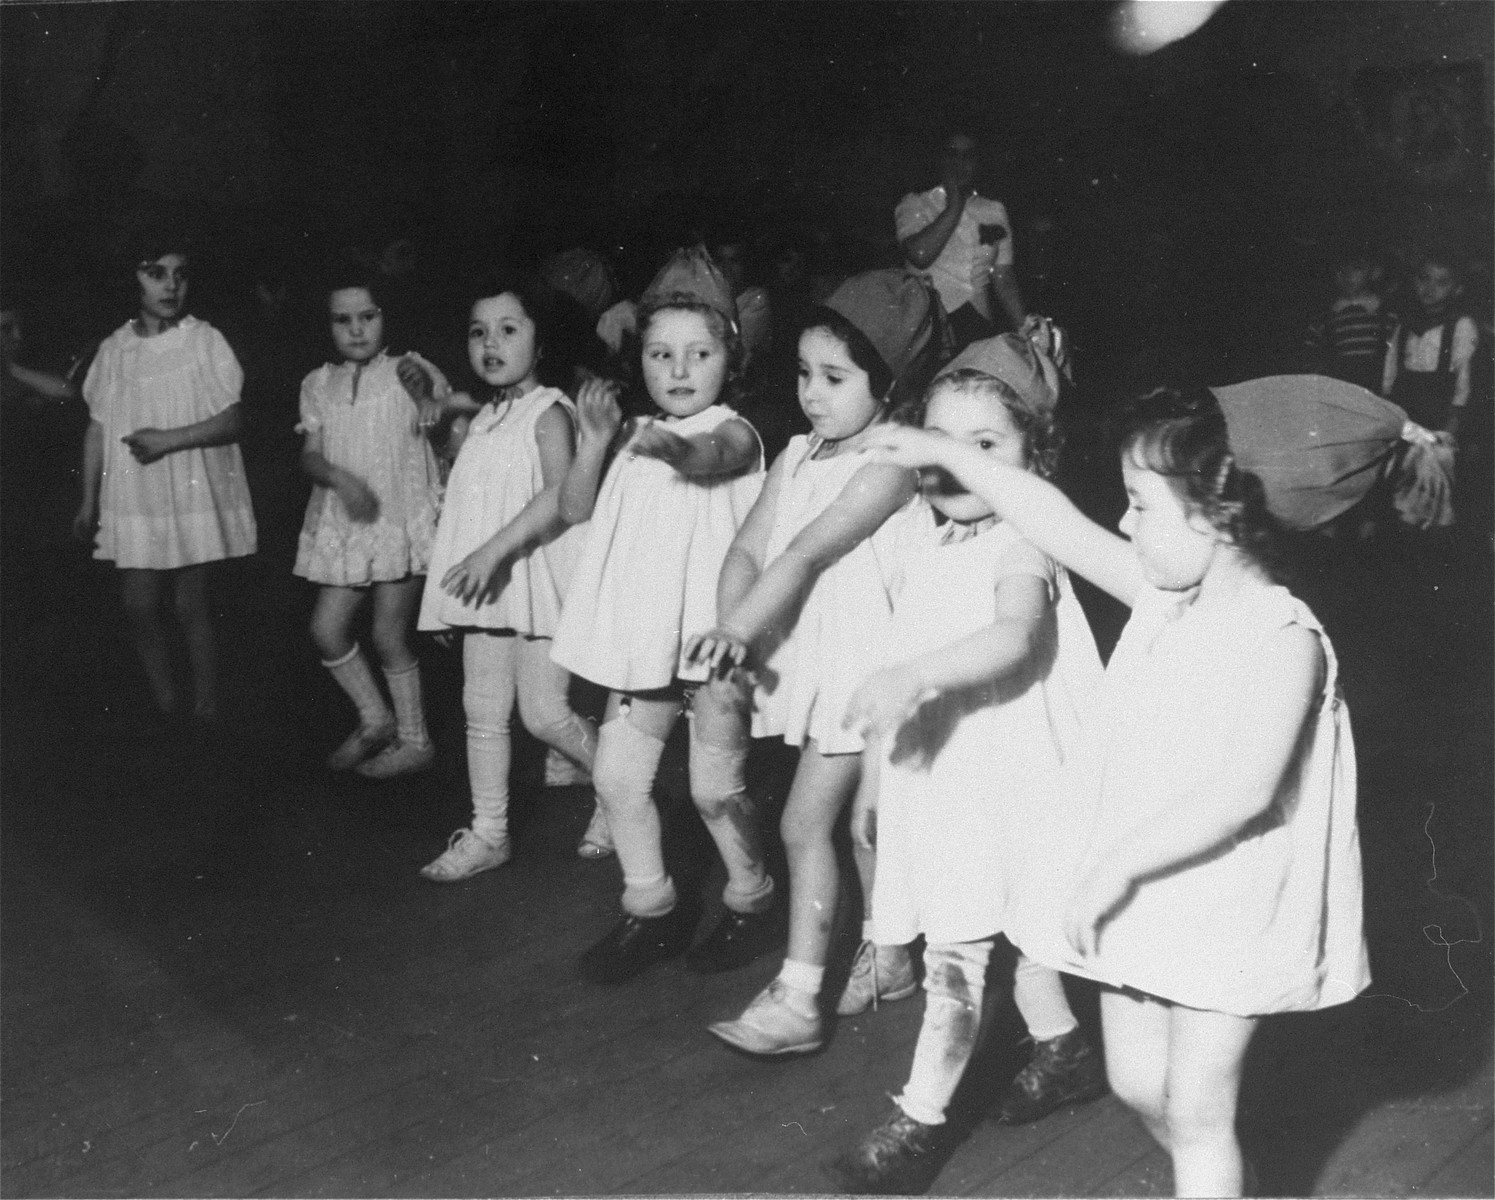 Young children perform a dance in the Zeilsheim displaced persons' camp.